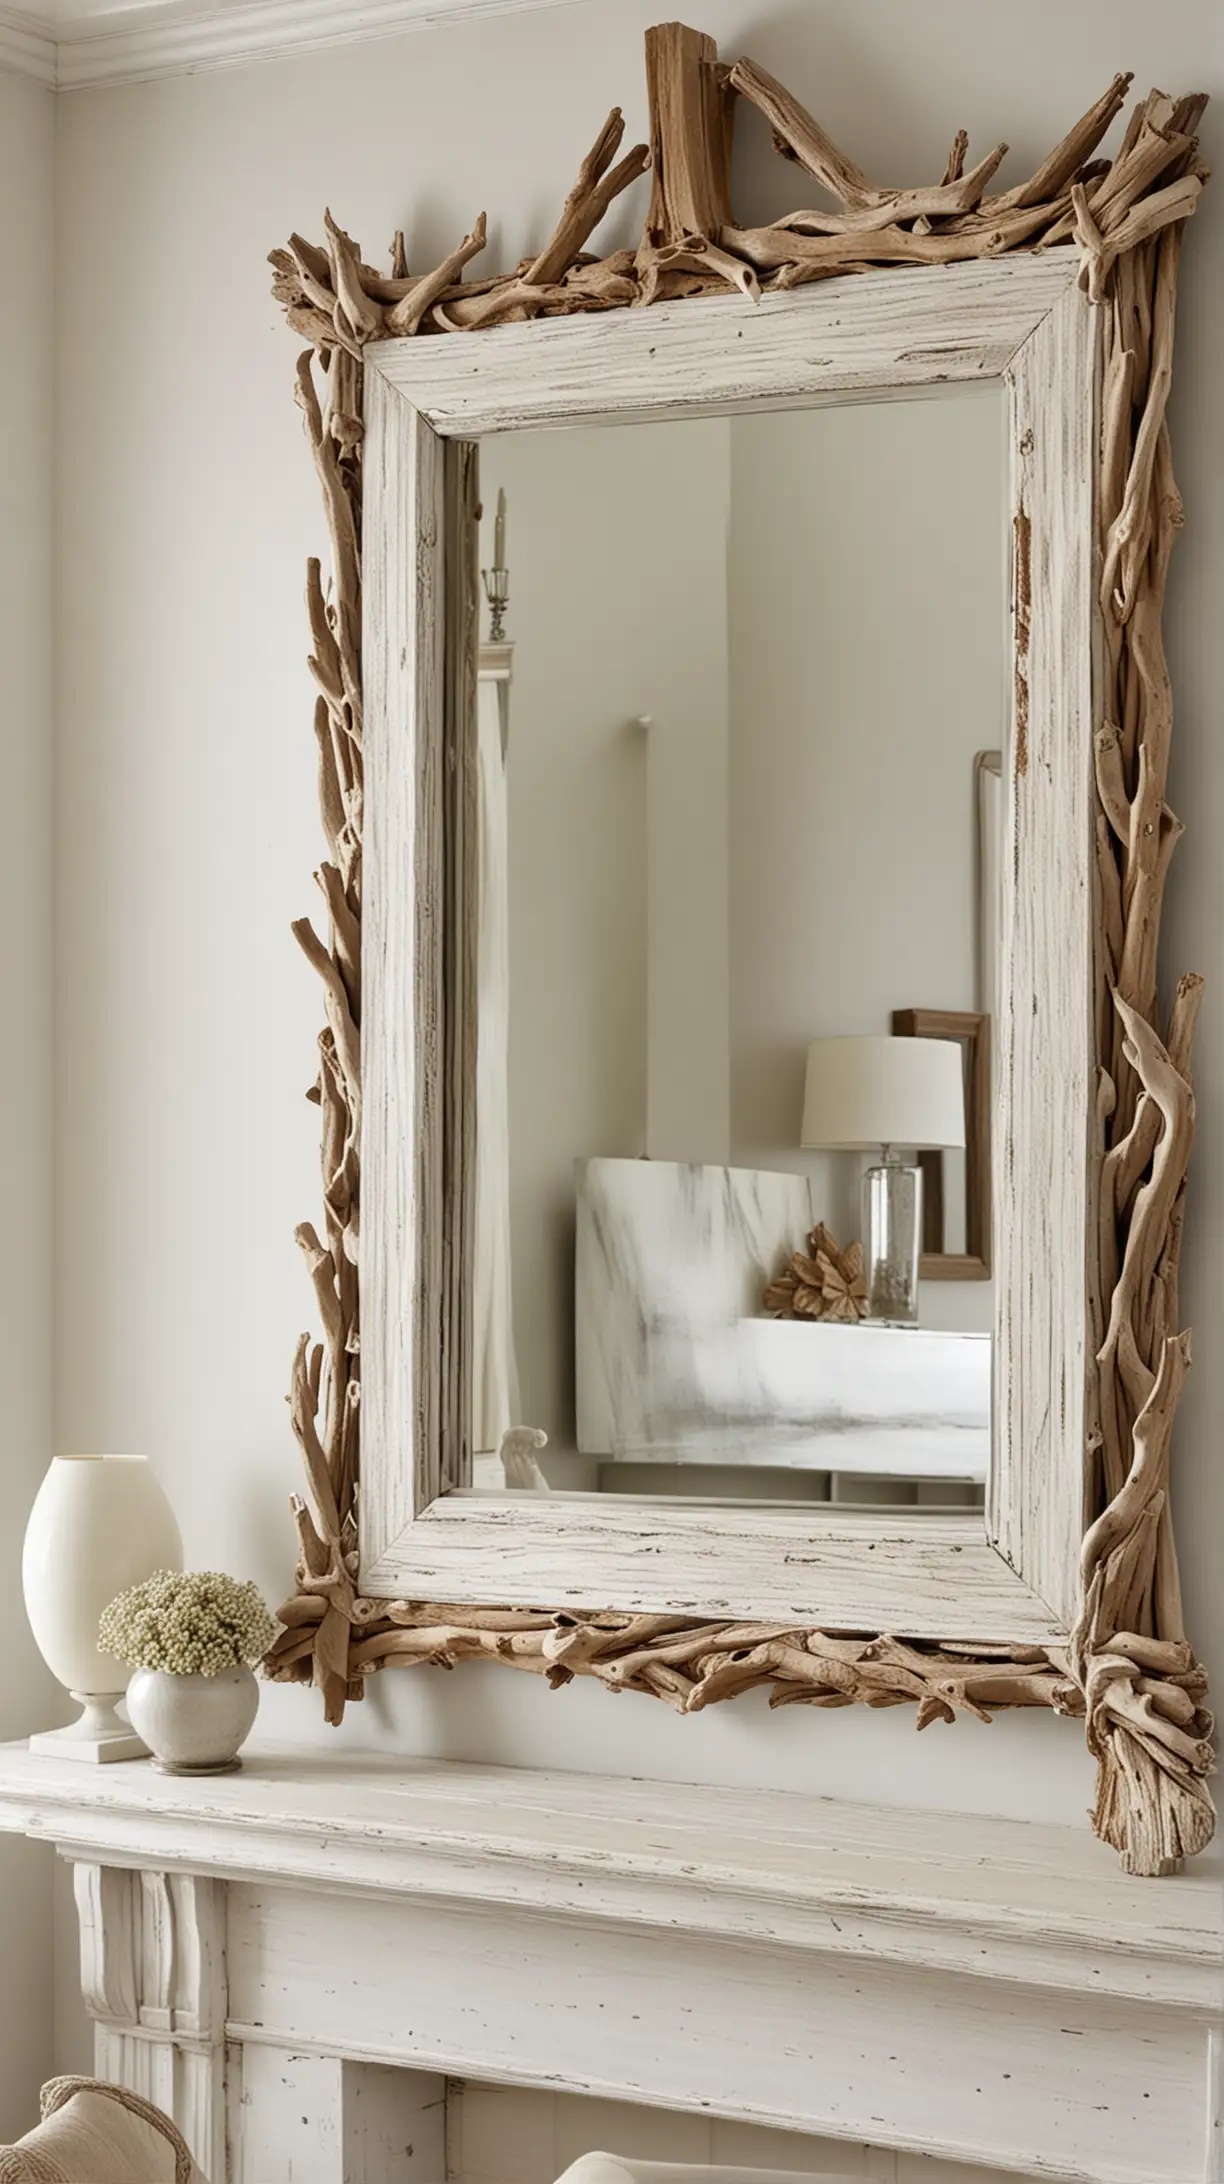 create me the image of Coastal Chic living room idea. Make sure to add the sitting or sofa in the frame. Furthermore everything in the idea should be in the frame of image like. Here's the design you have to create for me [Weathered Mirrors

Hanging mirrors with weathered frames that resemble driftwood not only add functionality but also enhances the coastal theme. They reflect light beautifully, making the space feel larger and brighter.]